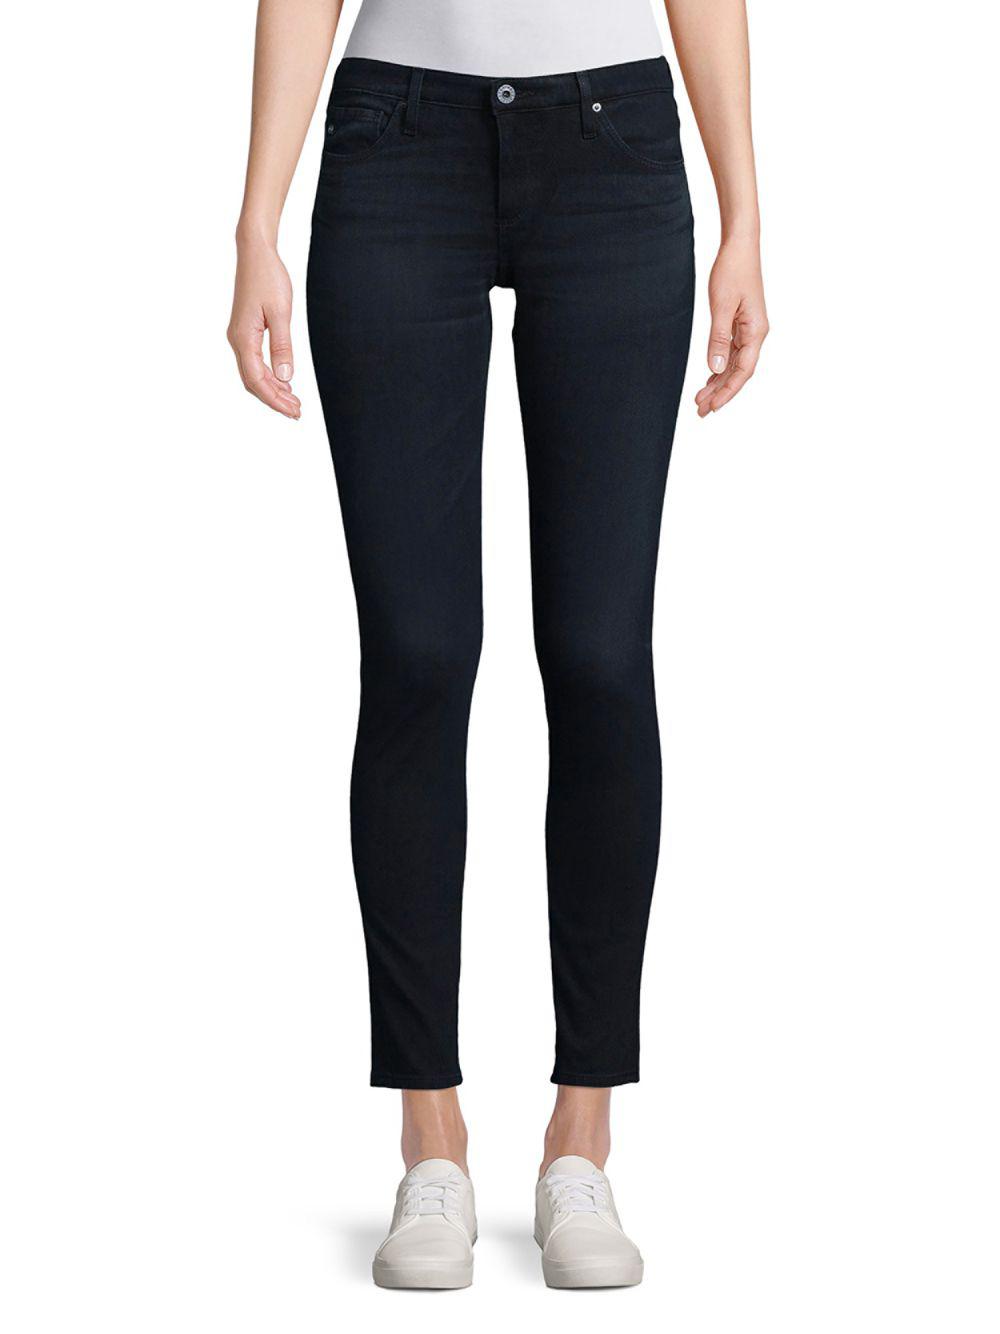 Ag jeans Ktl Super Skinny Ankle Jeans in Blue | Lyst